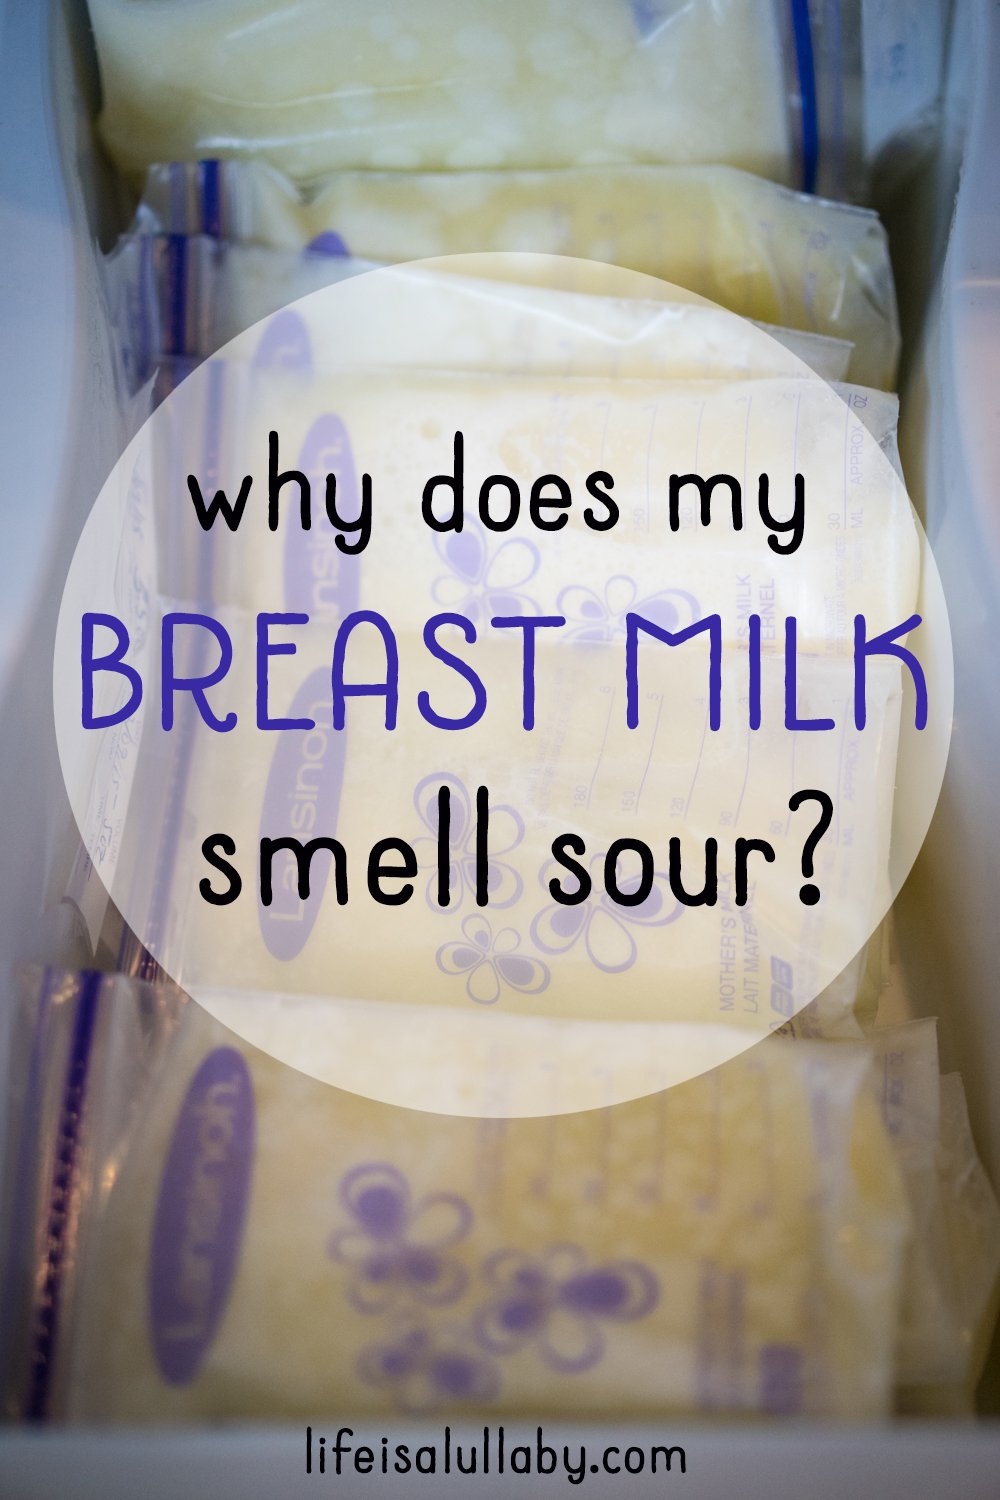 Why does my breast milk smell sour? - The Best Ideas for Kids